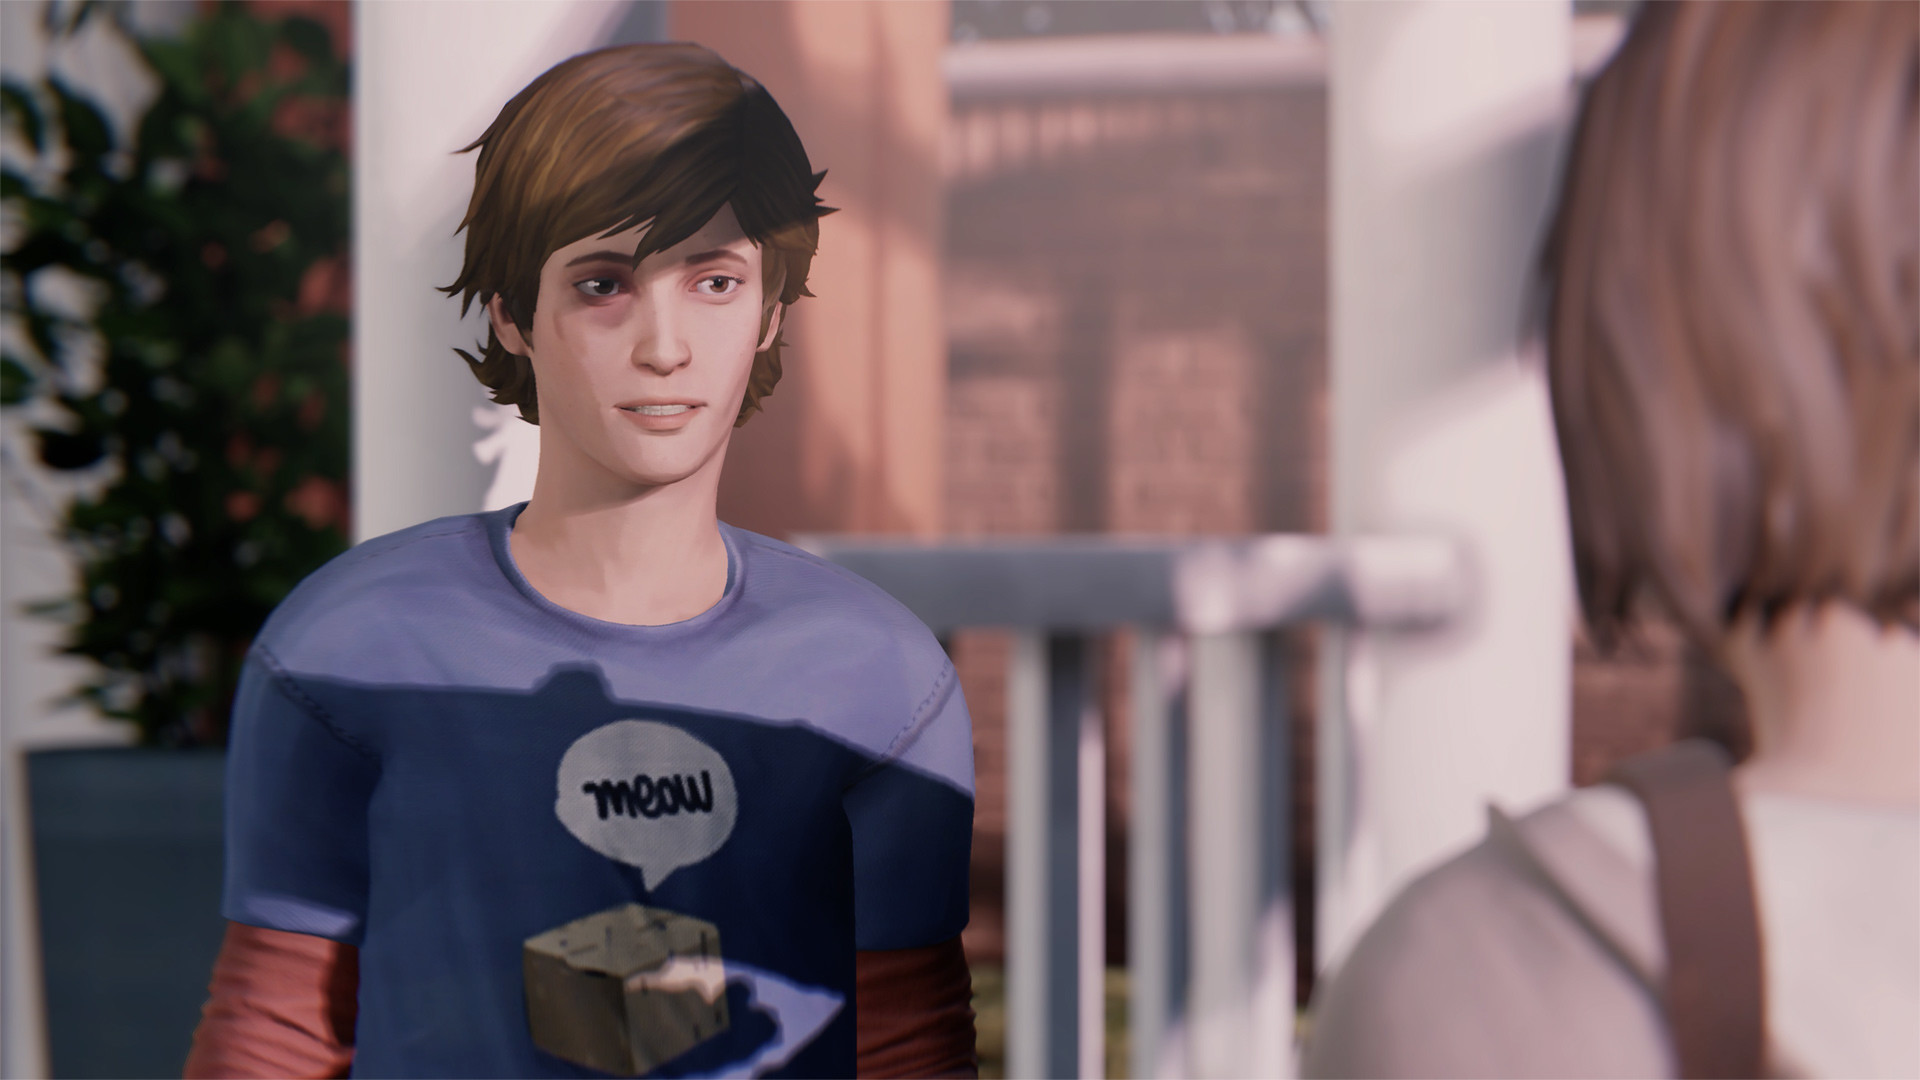 Steam Workshop::Life is Strange animated wallpapers